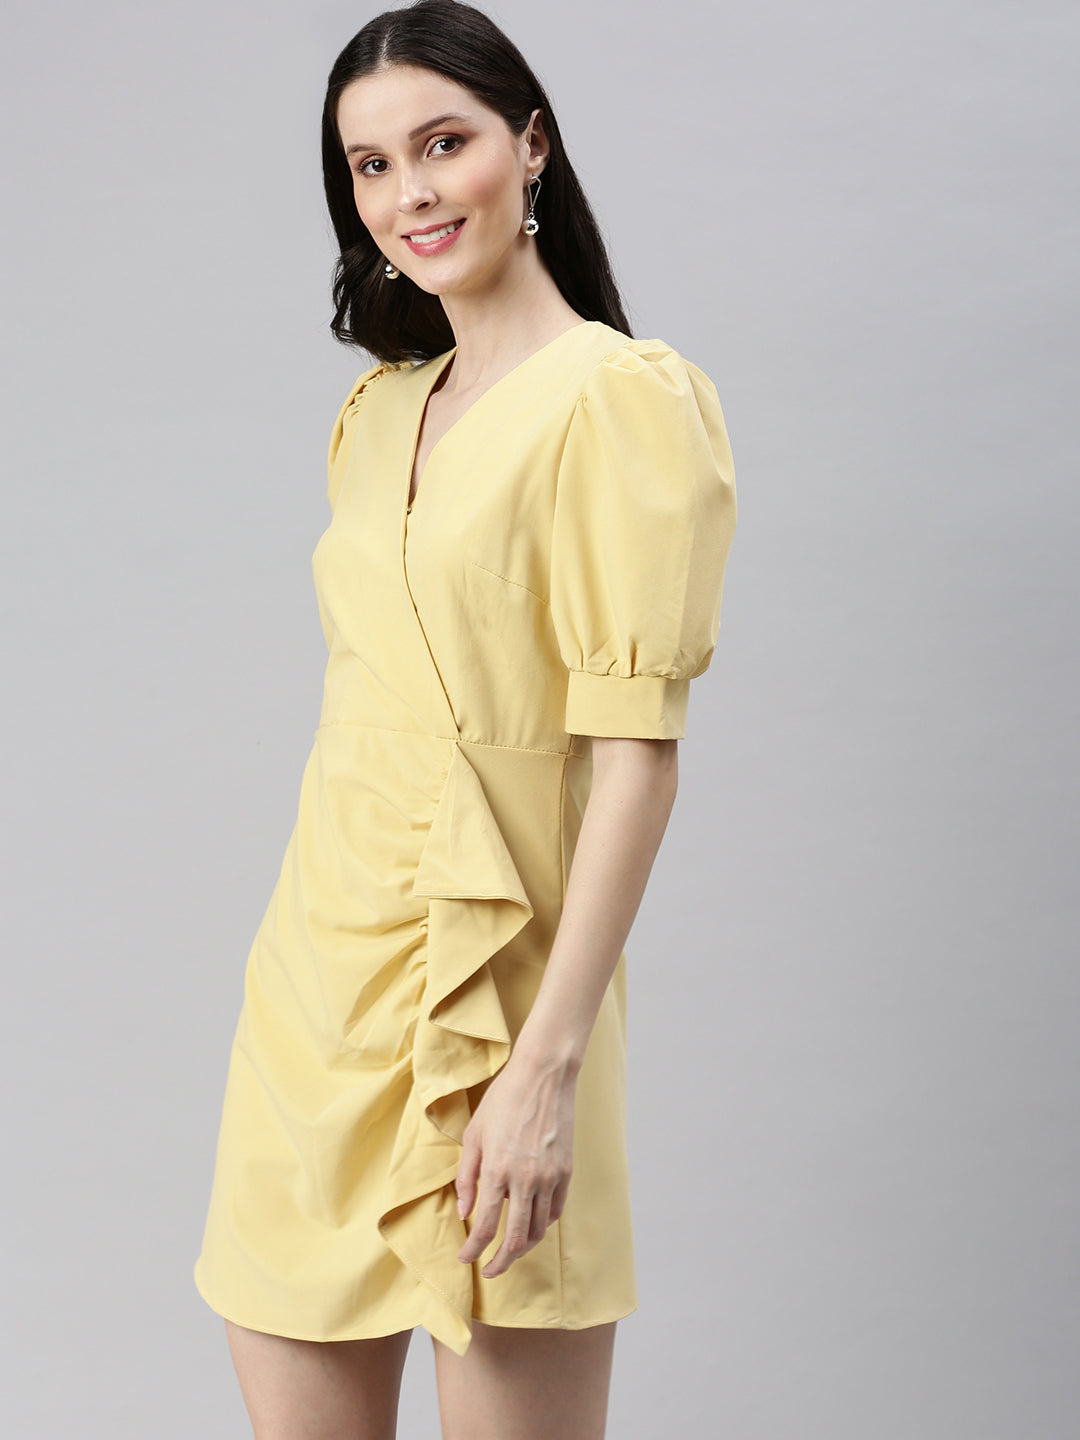 Women V-Neck Solid Fit and Flare Yellow Dress